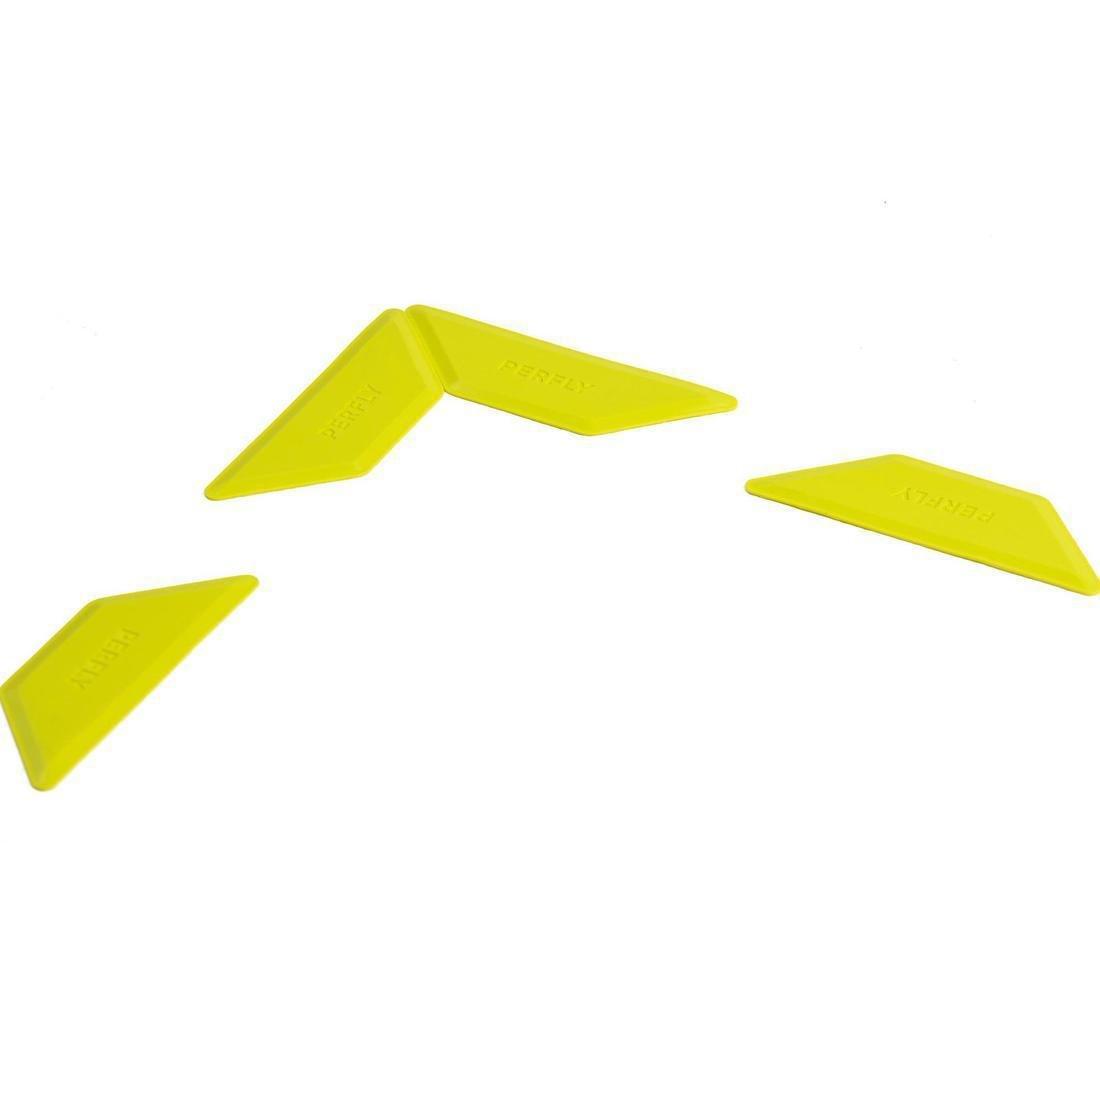 PERFLY - Badminton Court Marker, Yellow